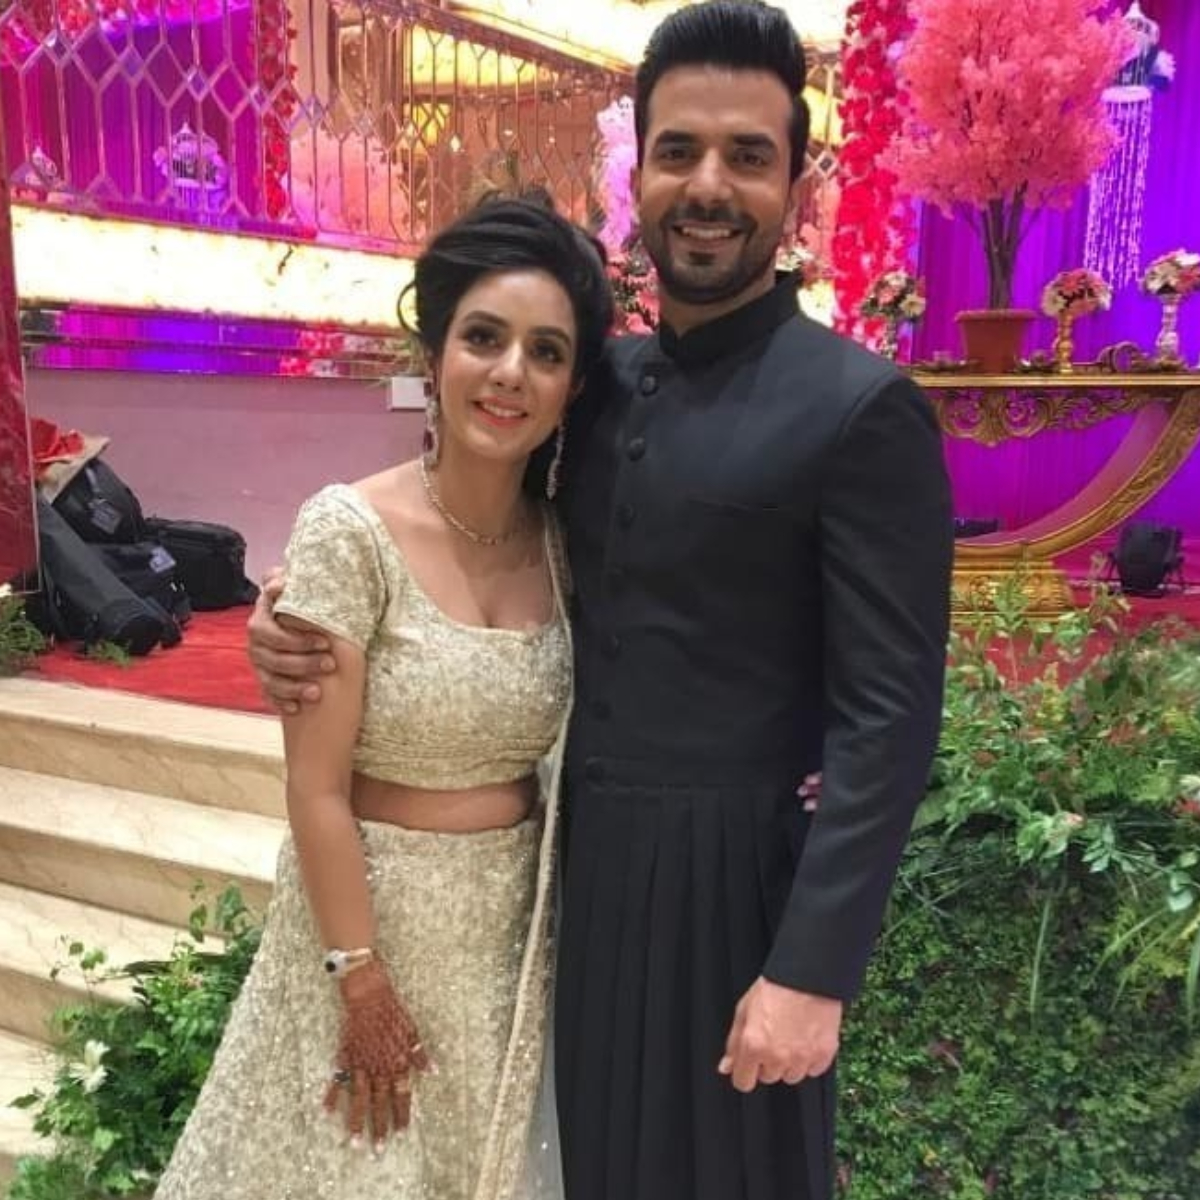 Raksha Bandhan EXCLUSIVE: Kundali Bhagya actor Manit Joura reveals his plans for the day with sister